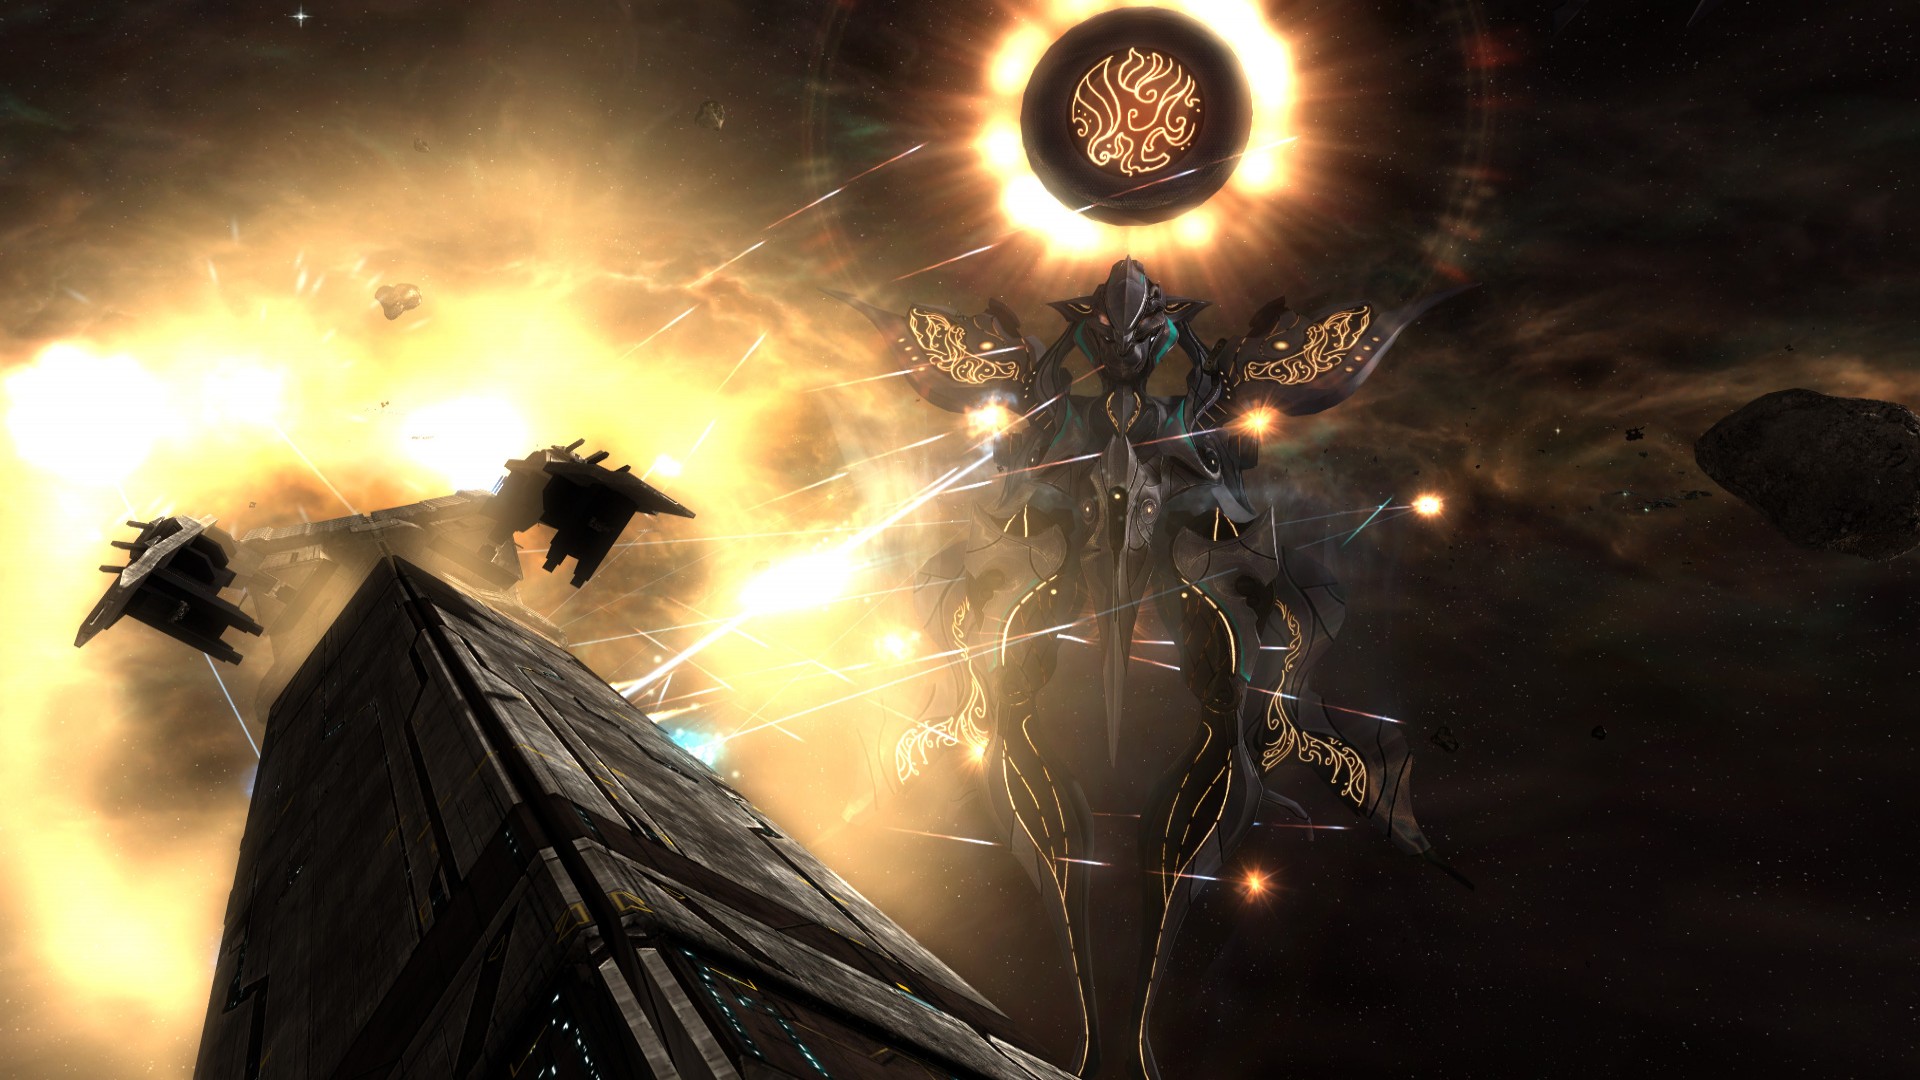 Best space games: Sins of a Solar Empire: Rebellion. Image shows ships fighting in the depths of space.